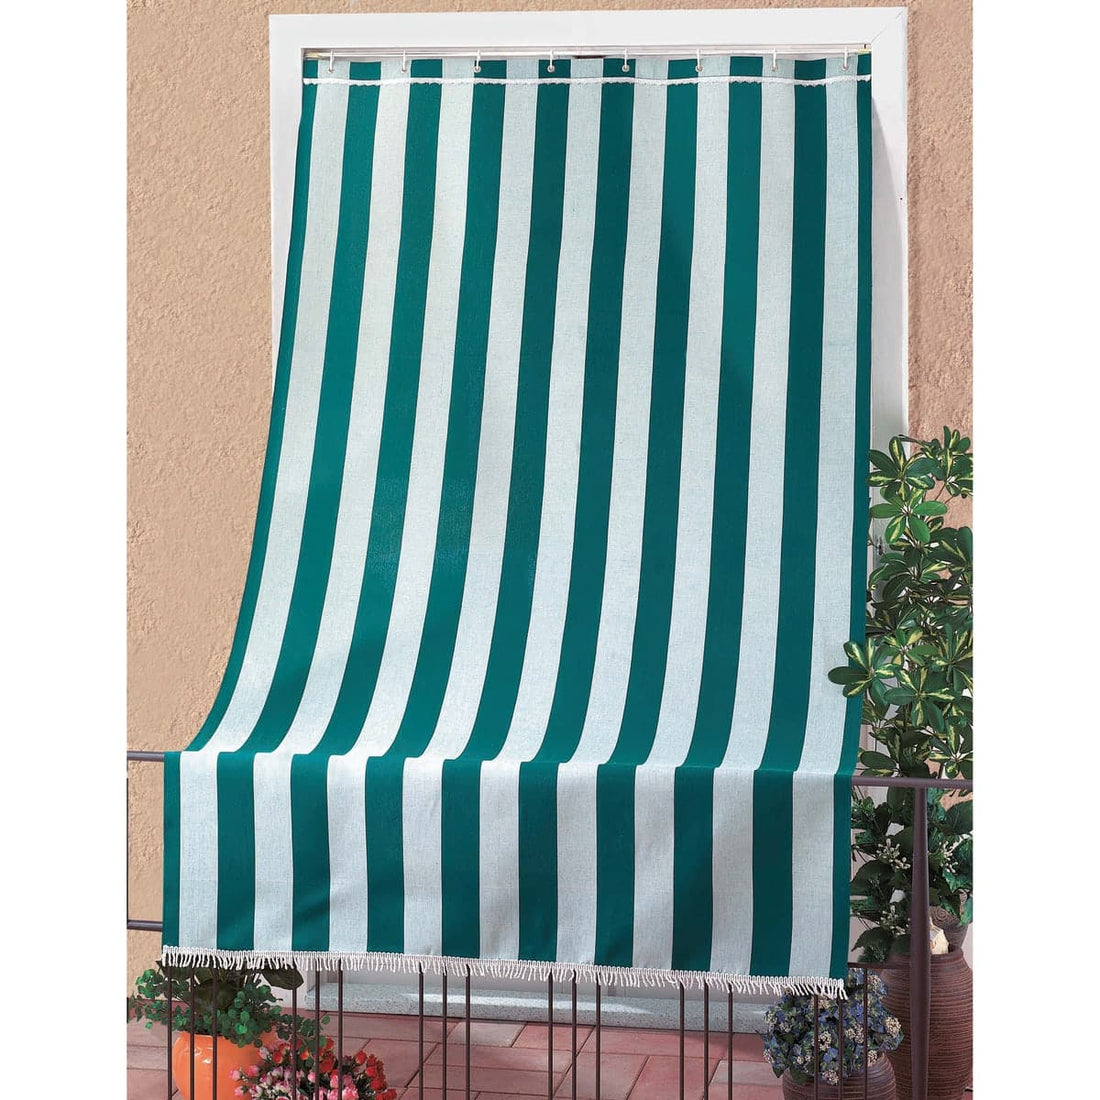 CARIBBEAN BALCONY AWNING 200X300 R/GREEN W/GLOOPS AND HOOKS - best price from Maltashopper.com BR480670144